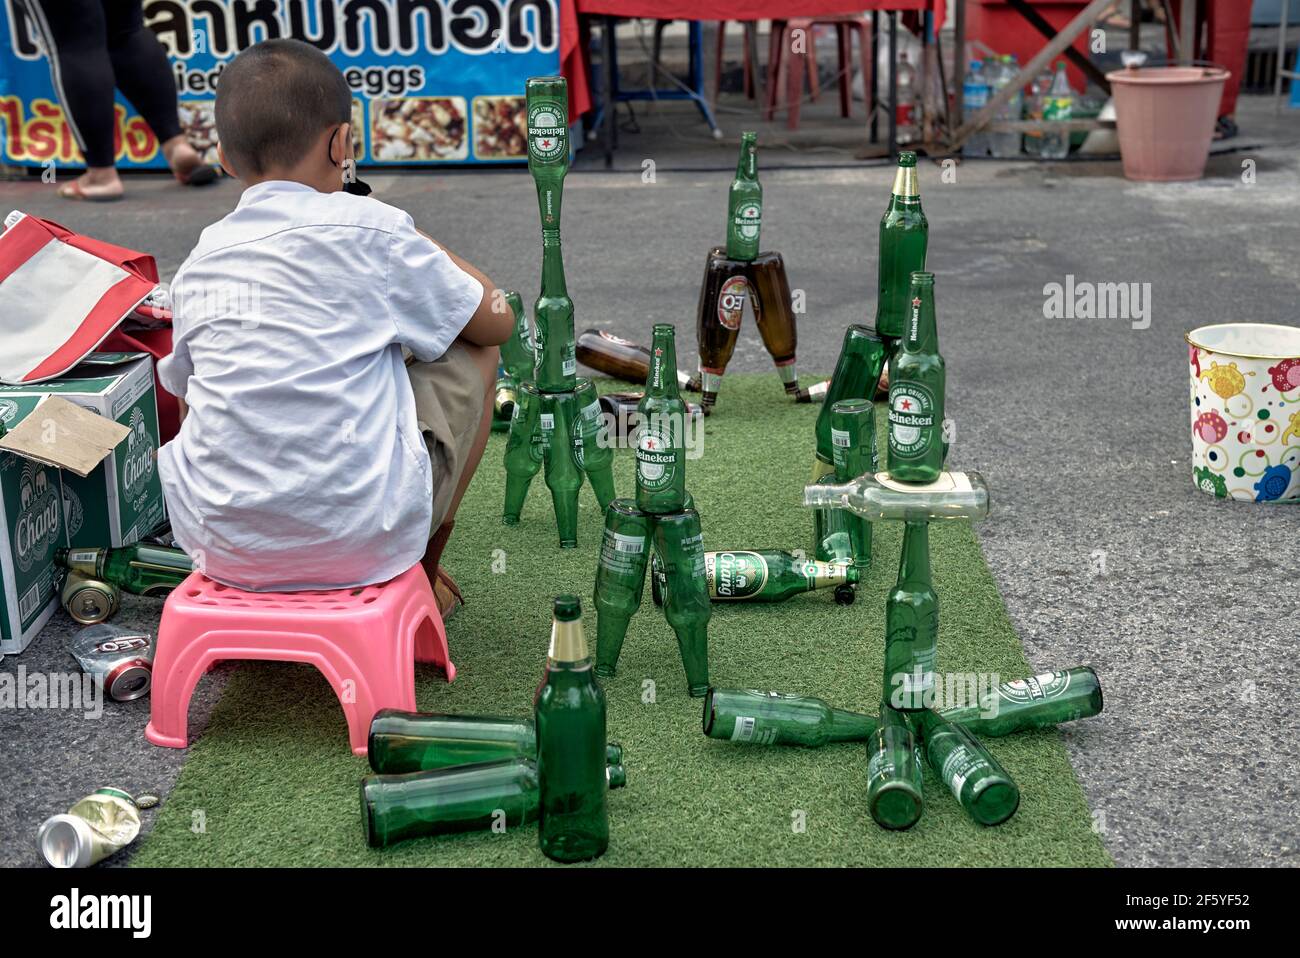 Imaginative child. Young boy arranging and balancing beer bottles trick to earn money on the street. Thailand, Southeast Asia Stock Photo